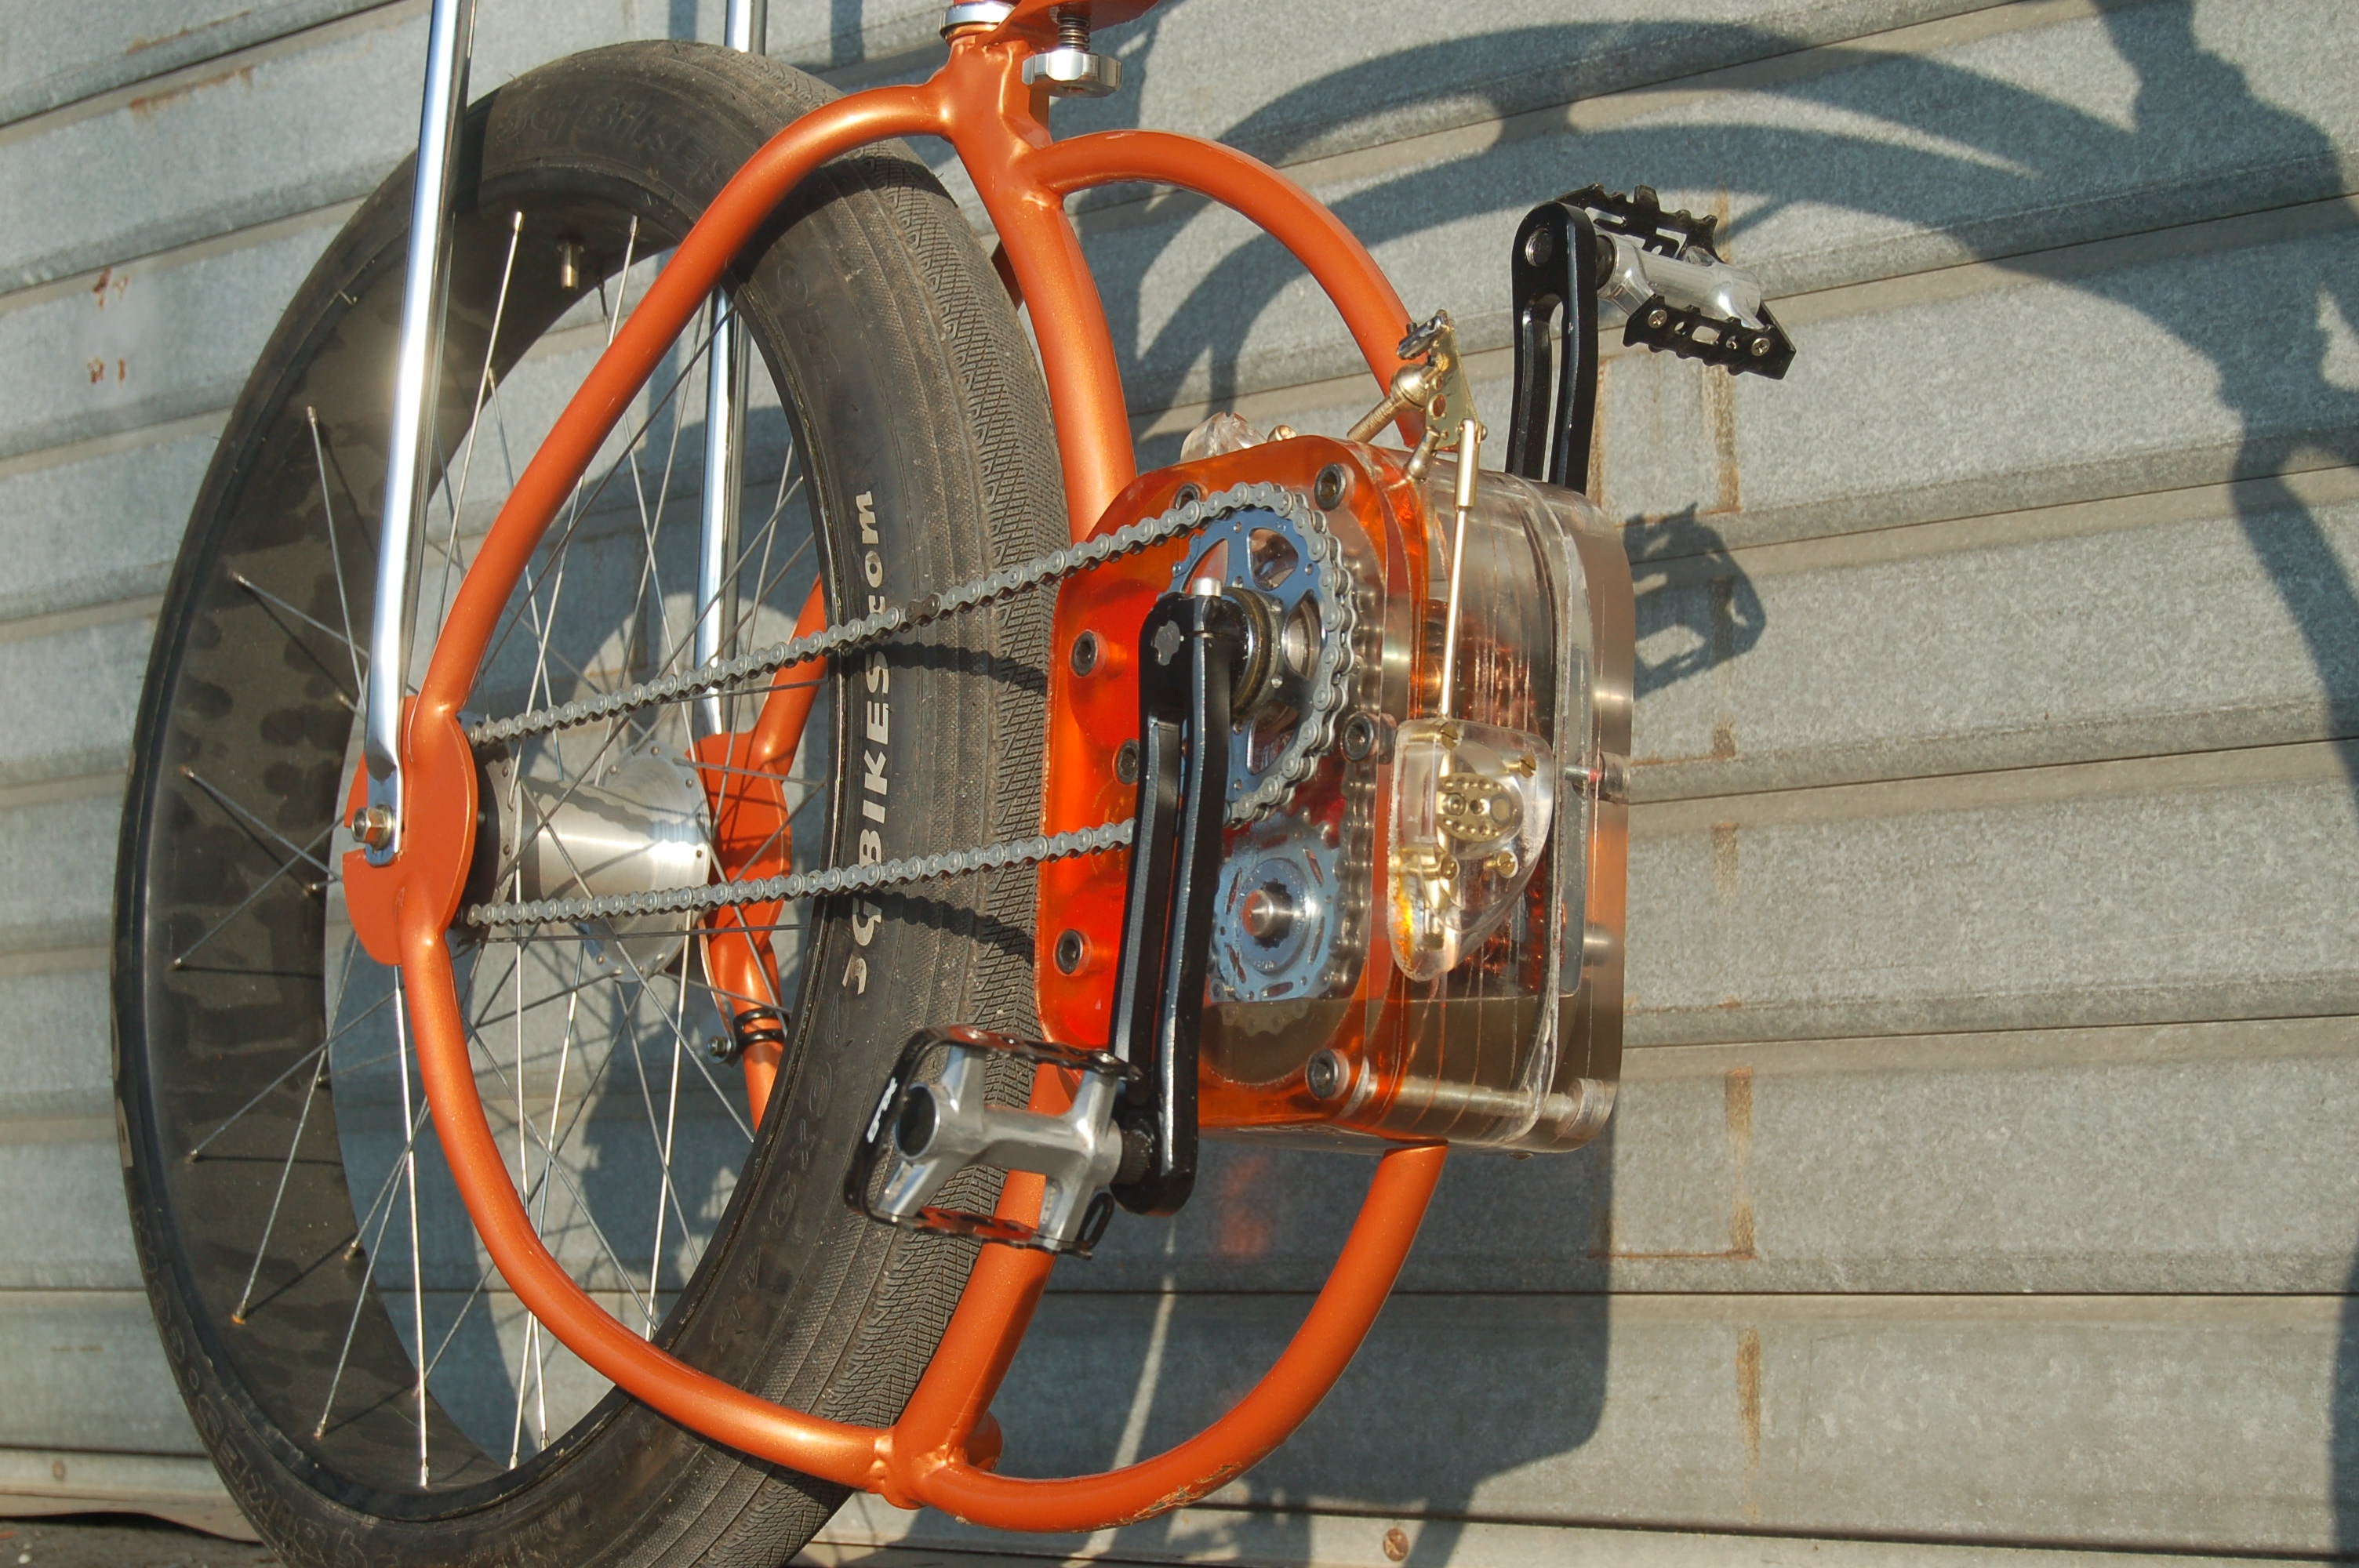 Transparent Gearbox on a Homemade Bicycle